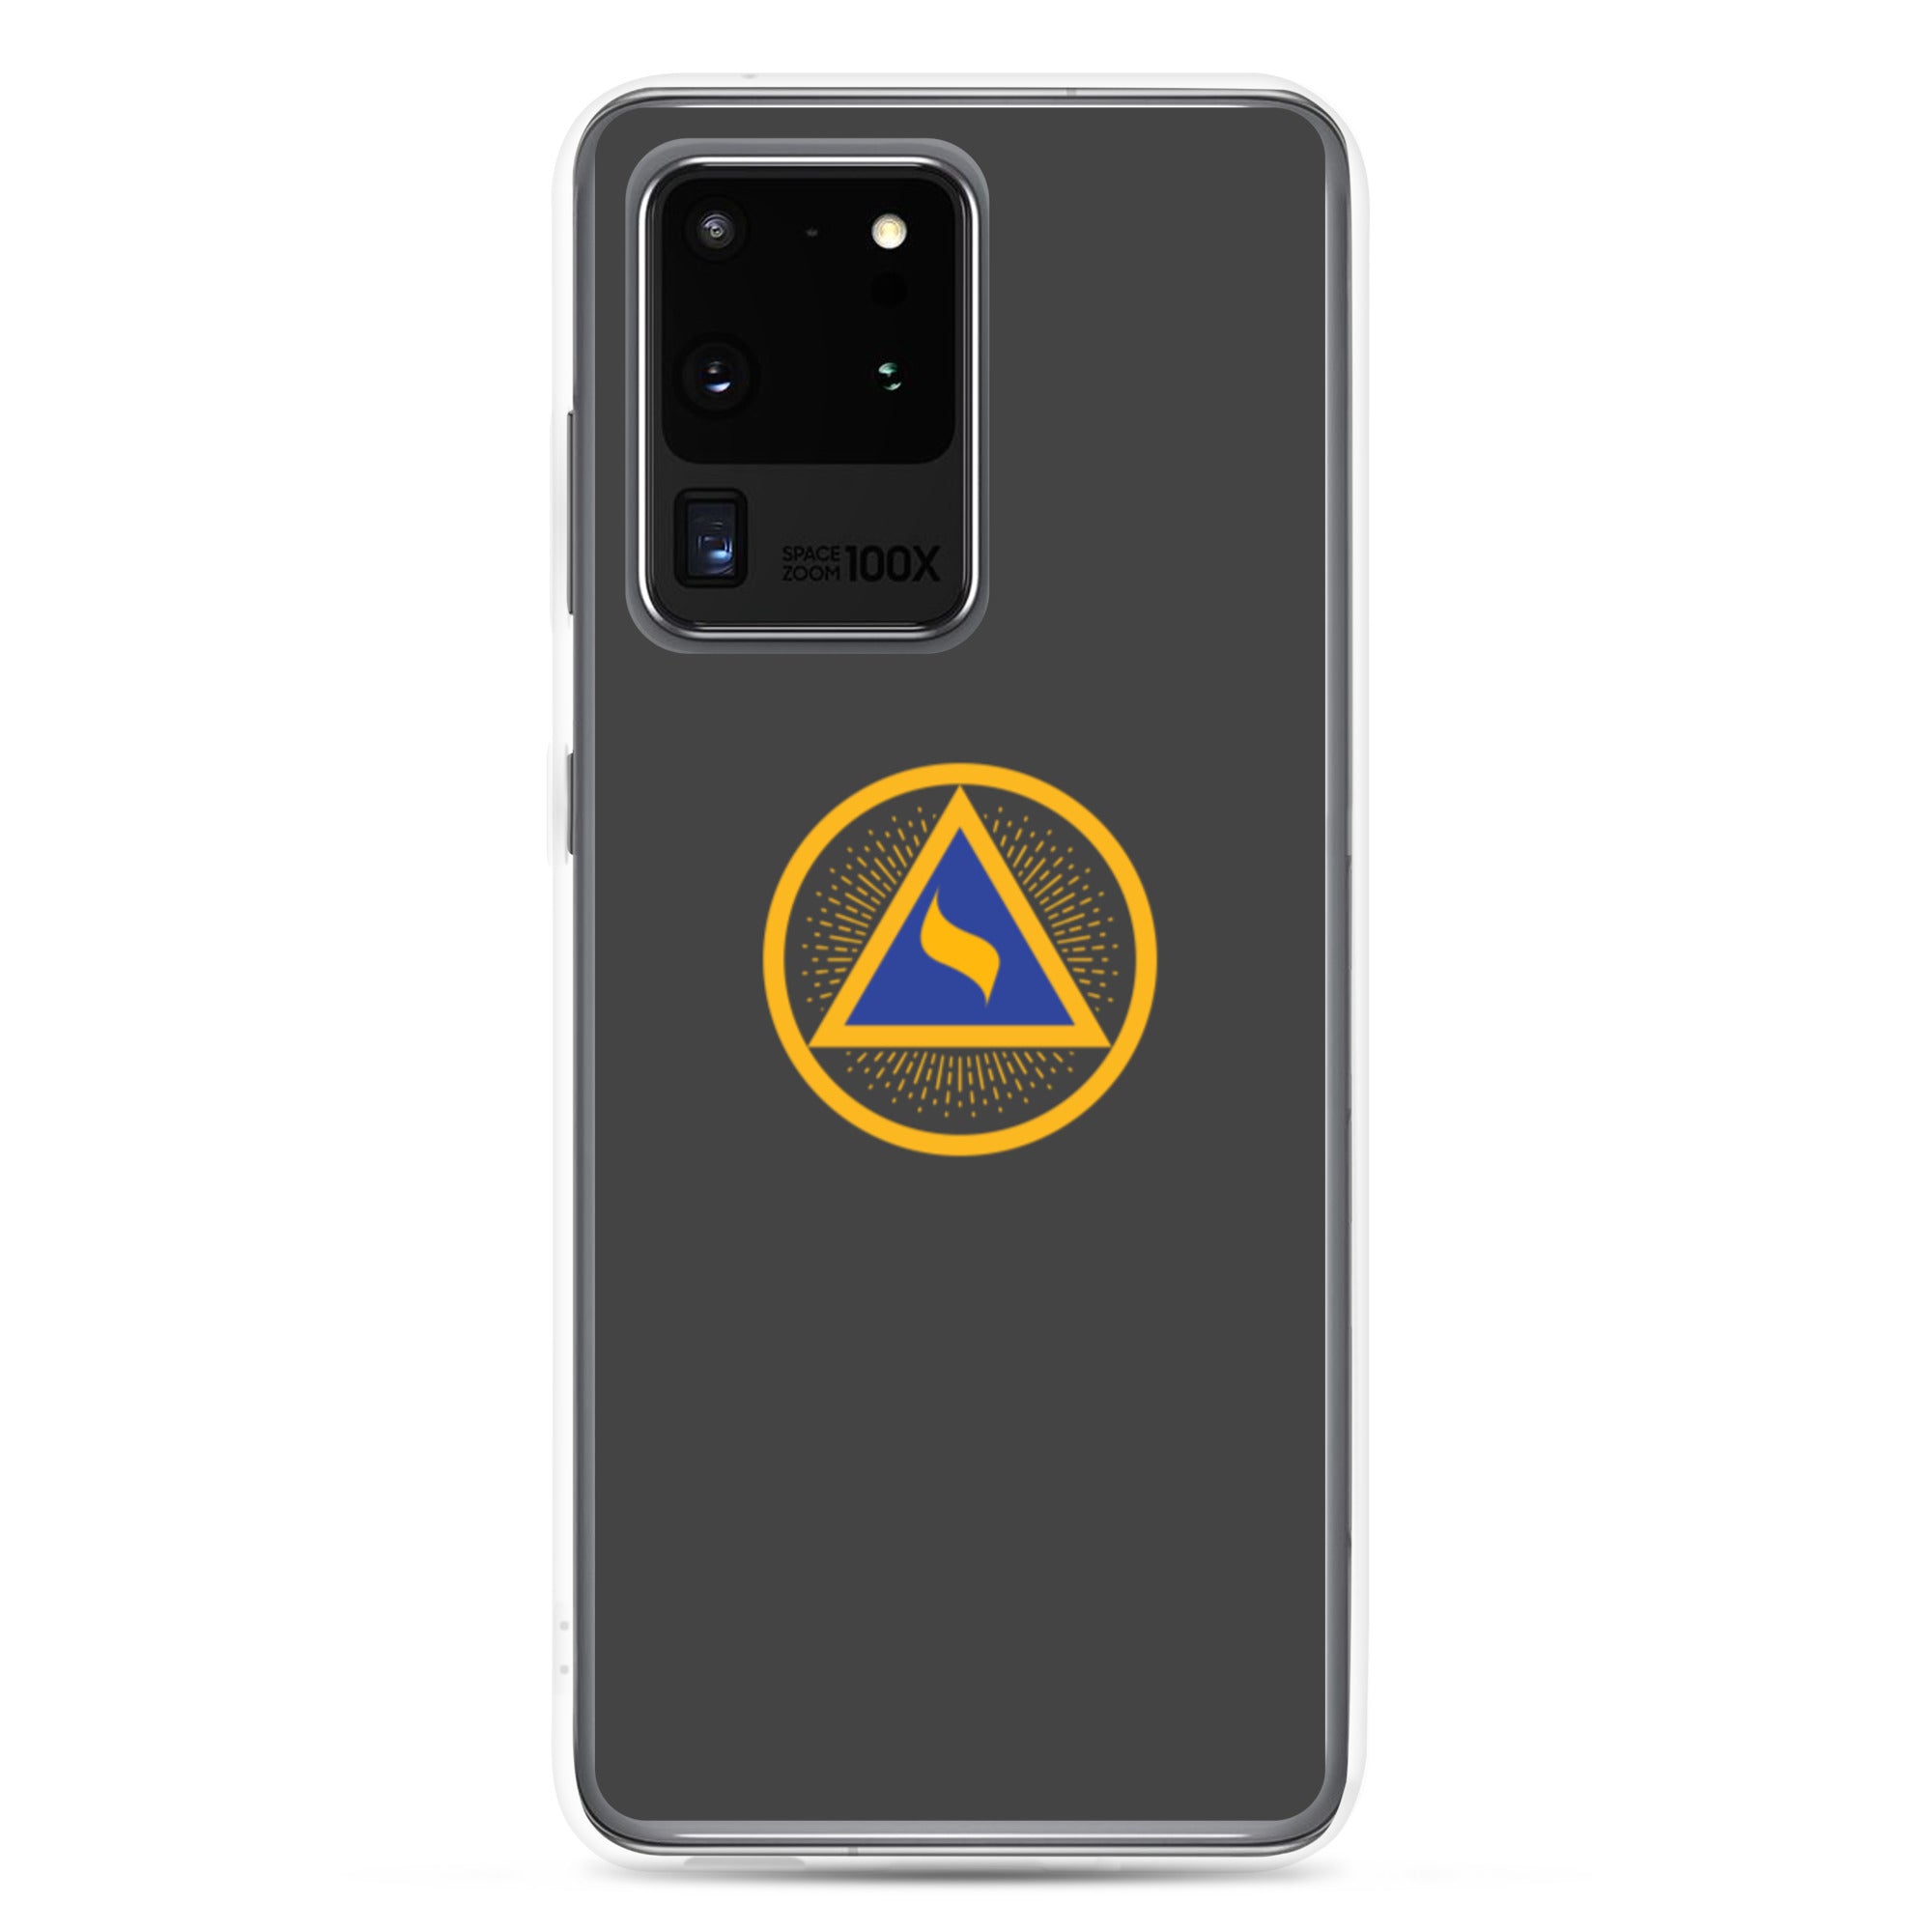 Lodge of Perfection No. 1 Samsung Case